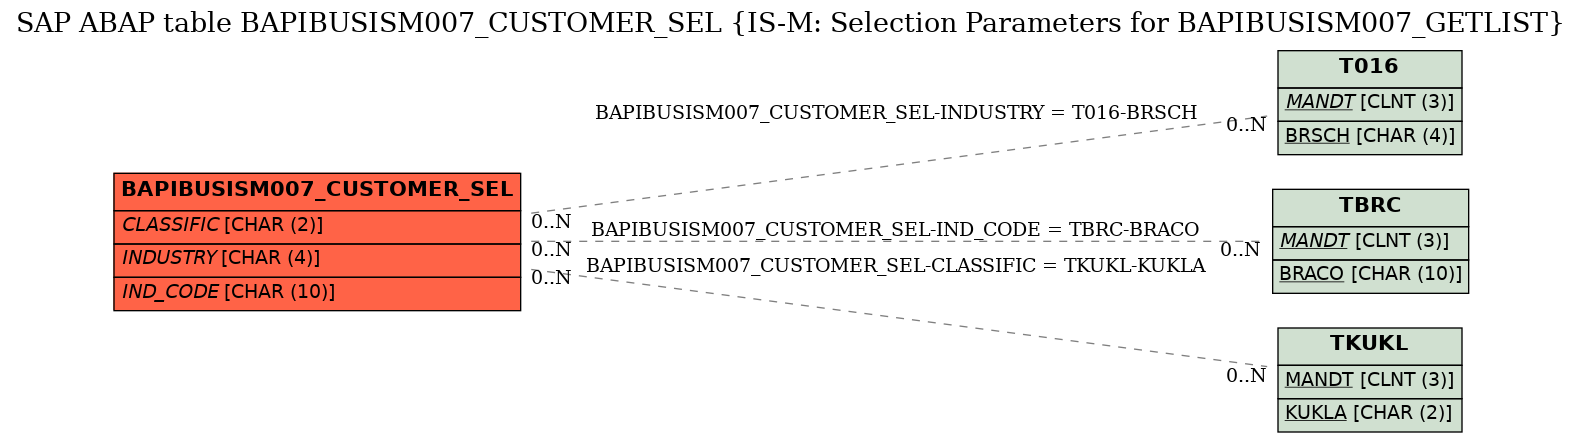 E-R Diagram for table BAPIBUSISM007_CUSTOMER_SEL (IS-M: Selection Parameters for BAPIBUSISM007_GETLIST)